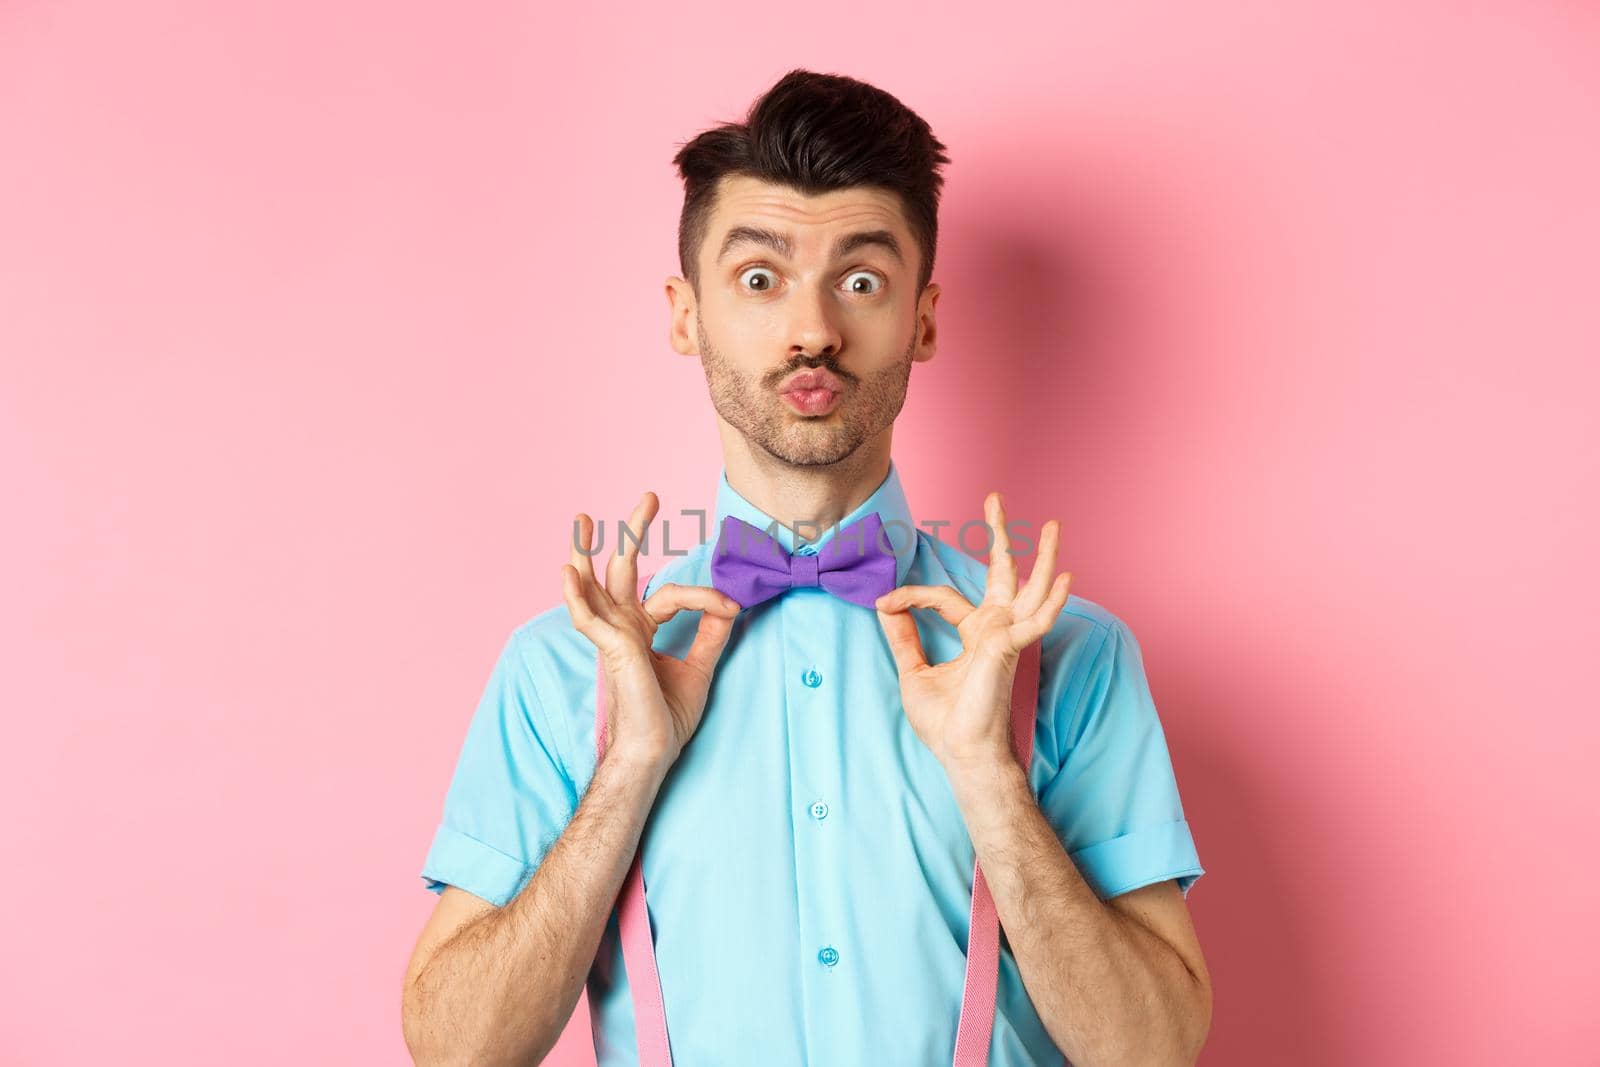 Handsome and funny young man pucker lips for kiss, showing his classy bow-tie, wearing clothes for party, standing on pink background.